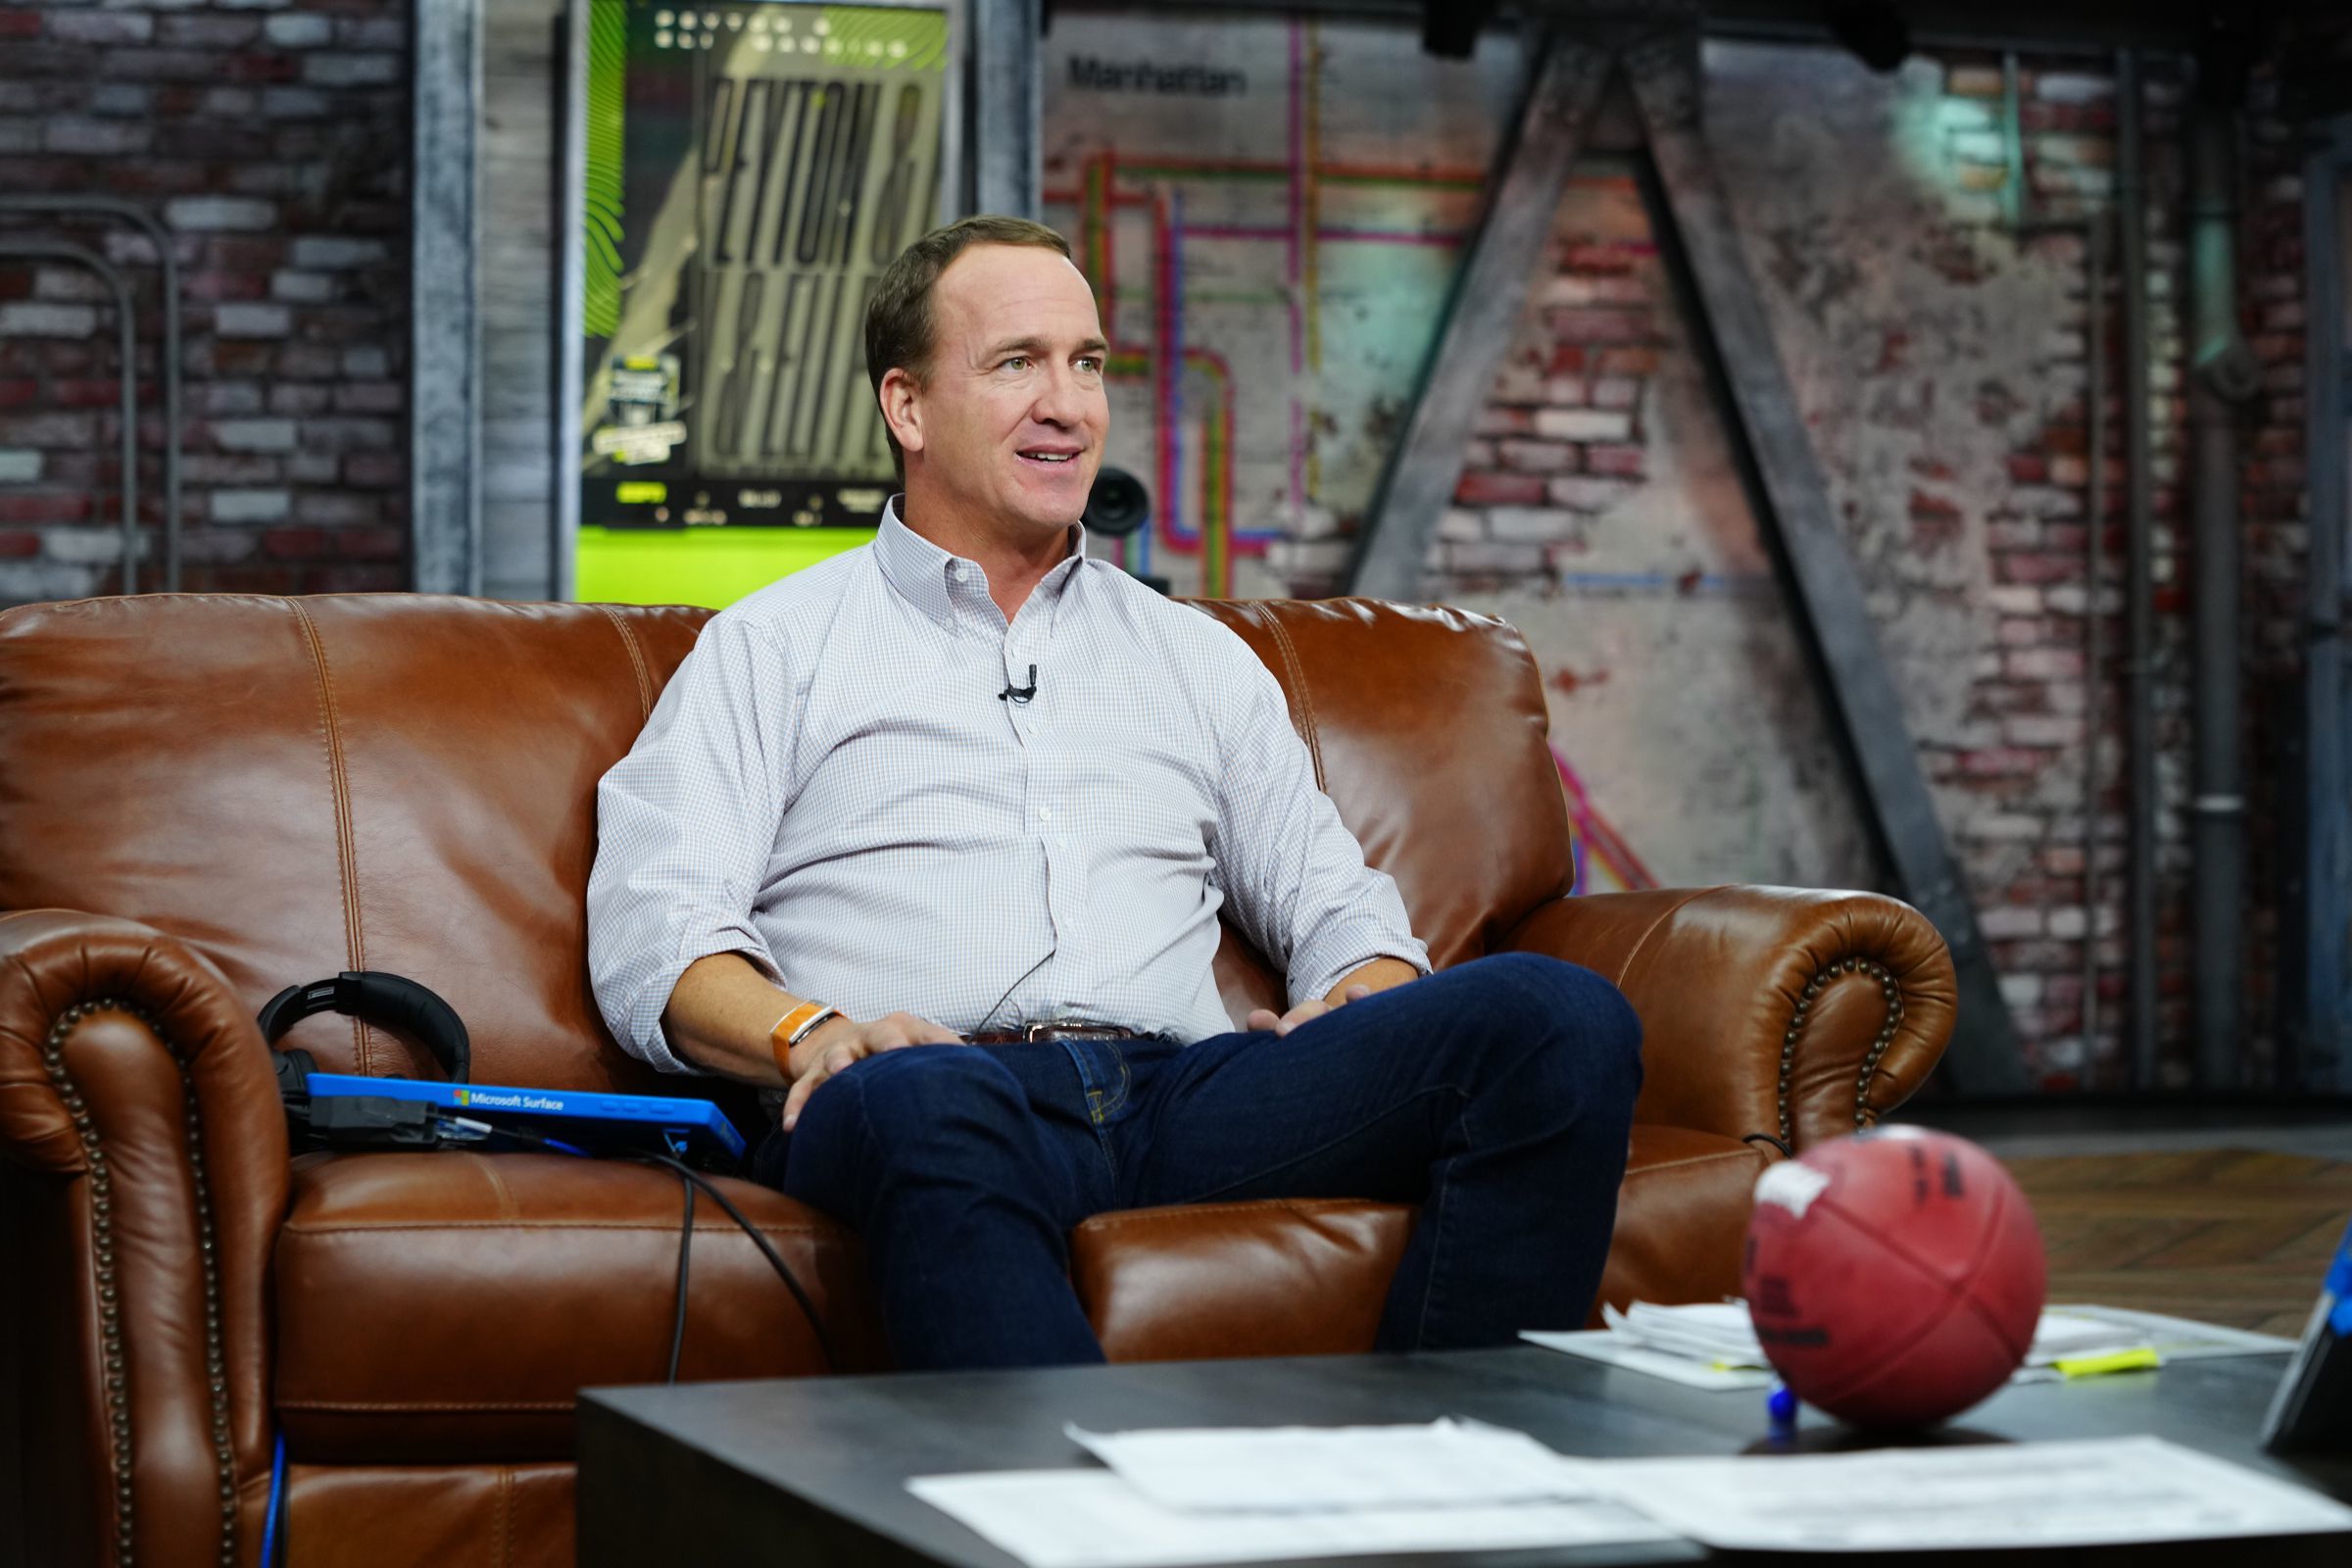 ESPN Has a Hit With Peyton and Eli's Monday Night Football